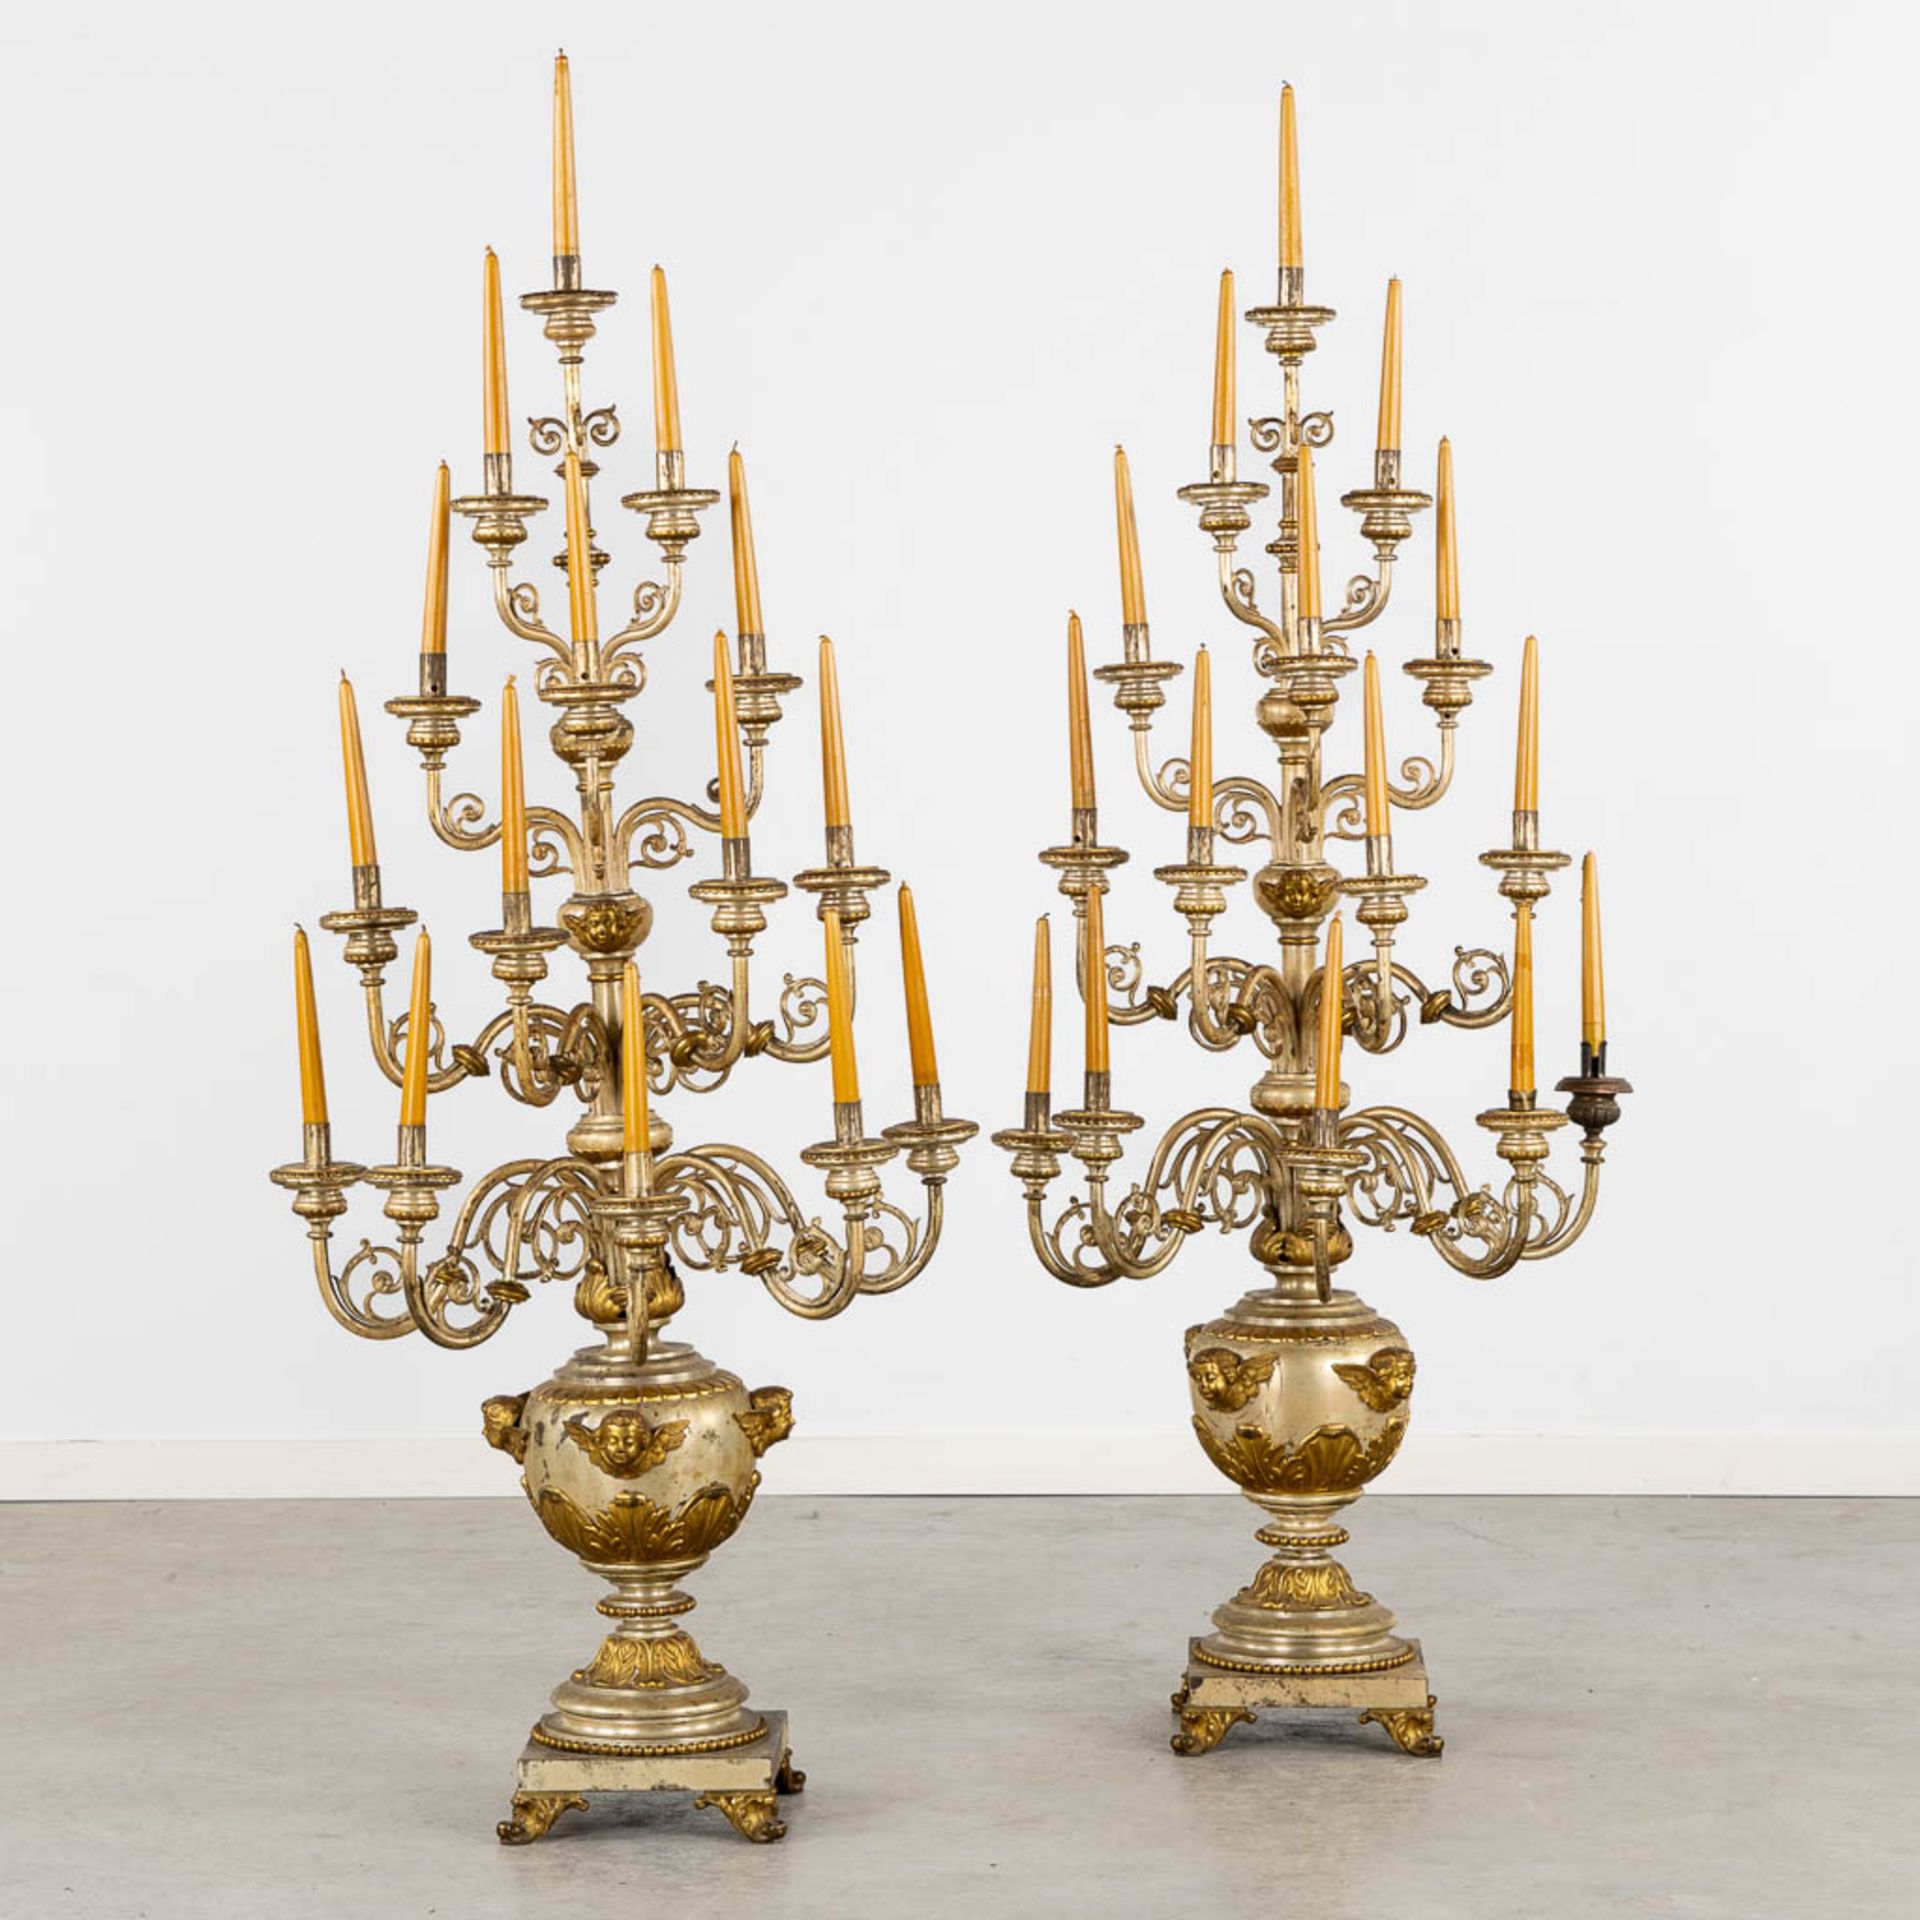 An impressive pair of candelabra, 15 candles, gold and silver-plated metal. (L:44 x W:60 x H:138 cm) - Image 3 of 12